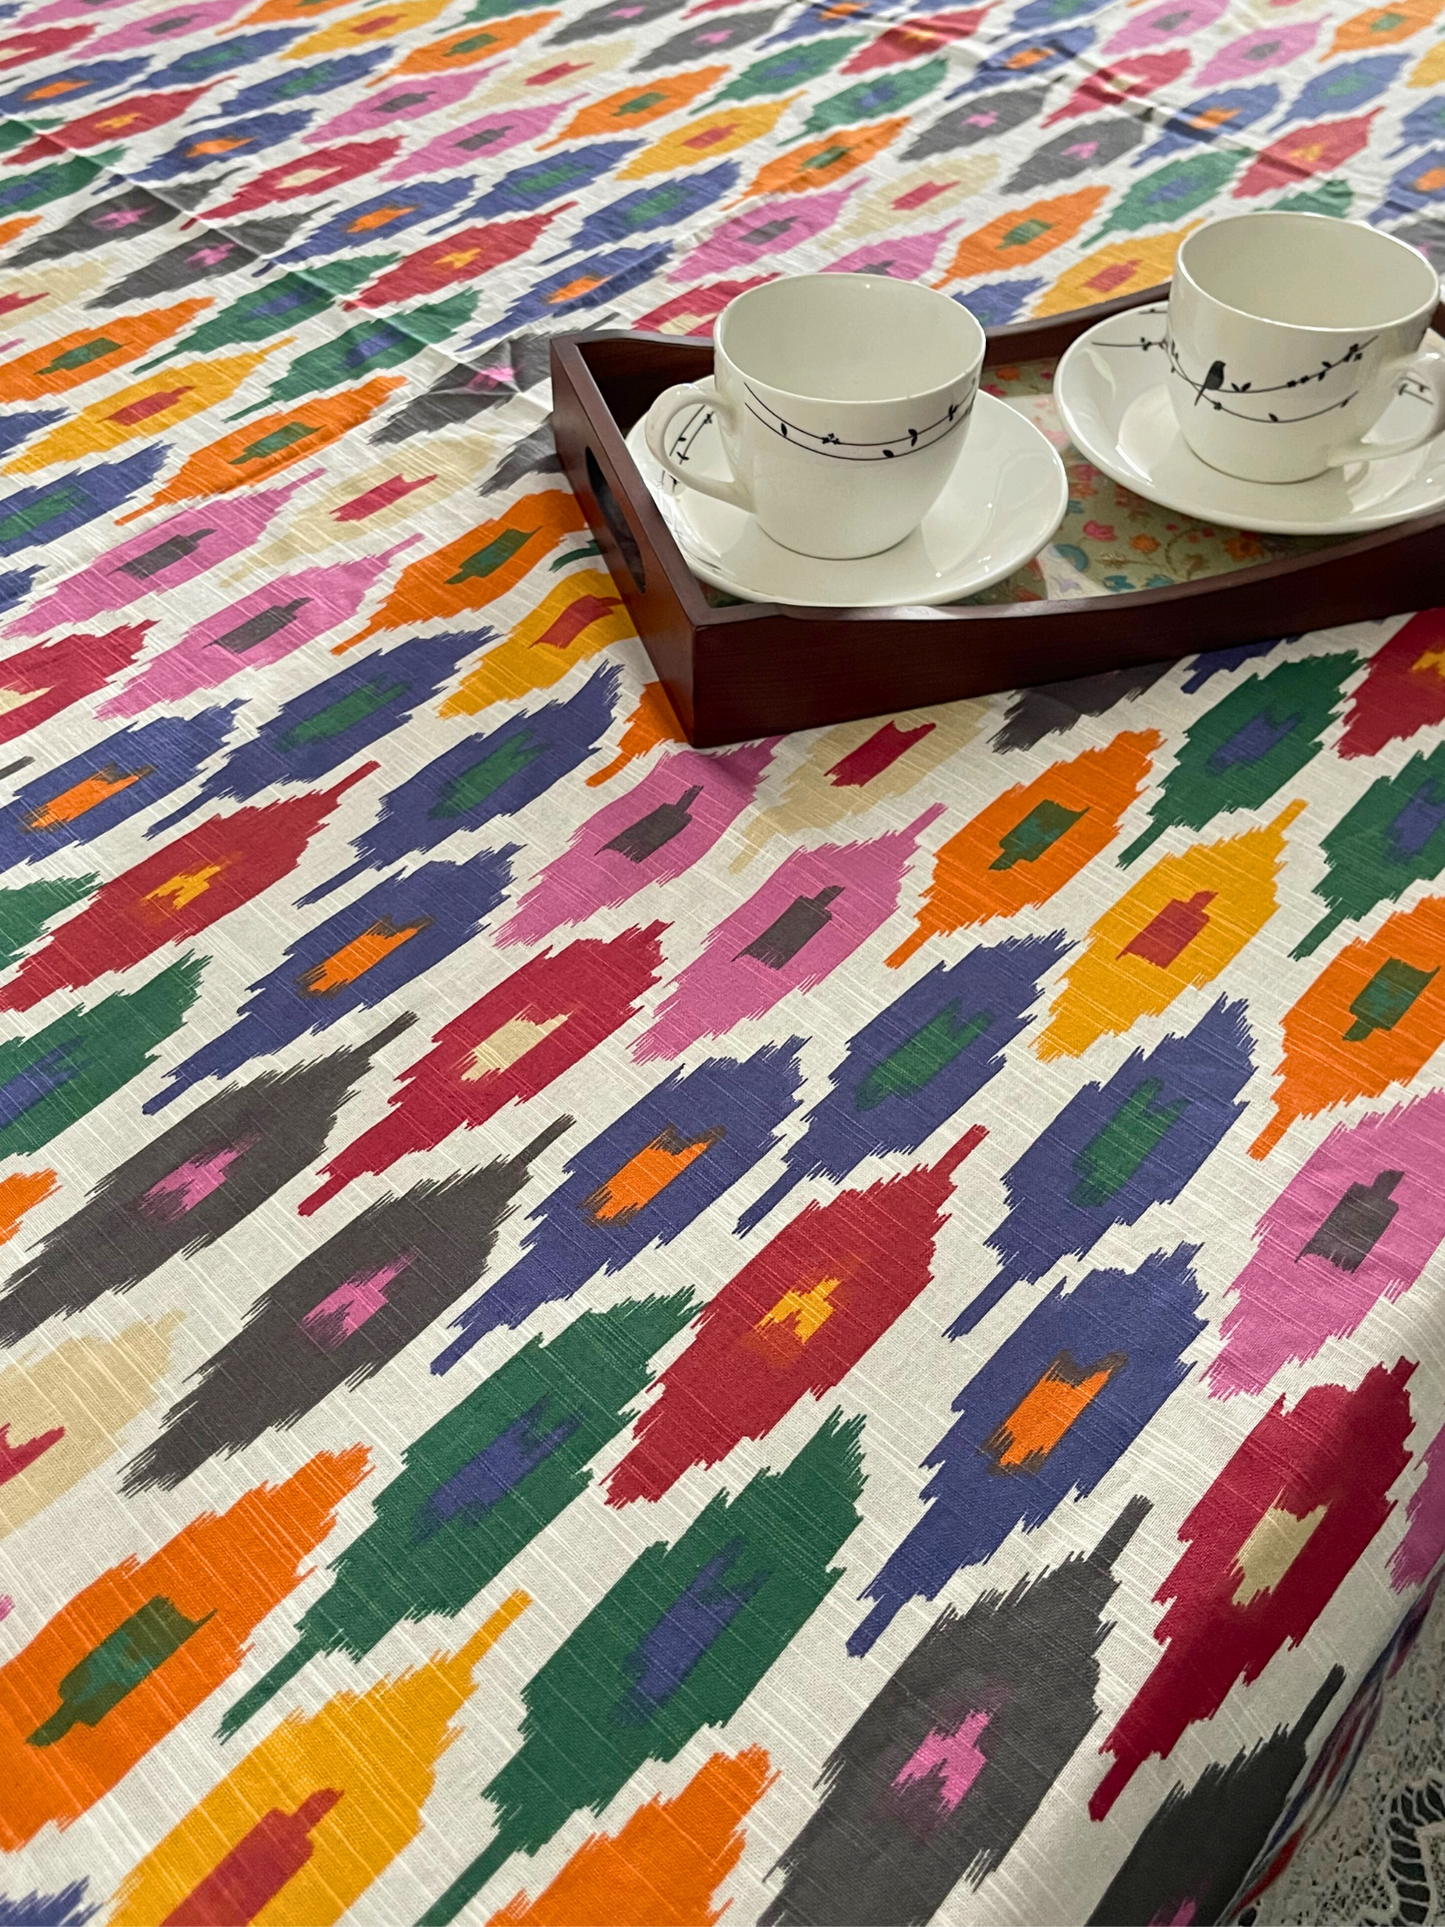 colour pop table linen for dining tables for family lunch